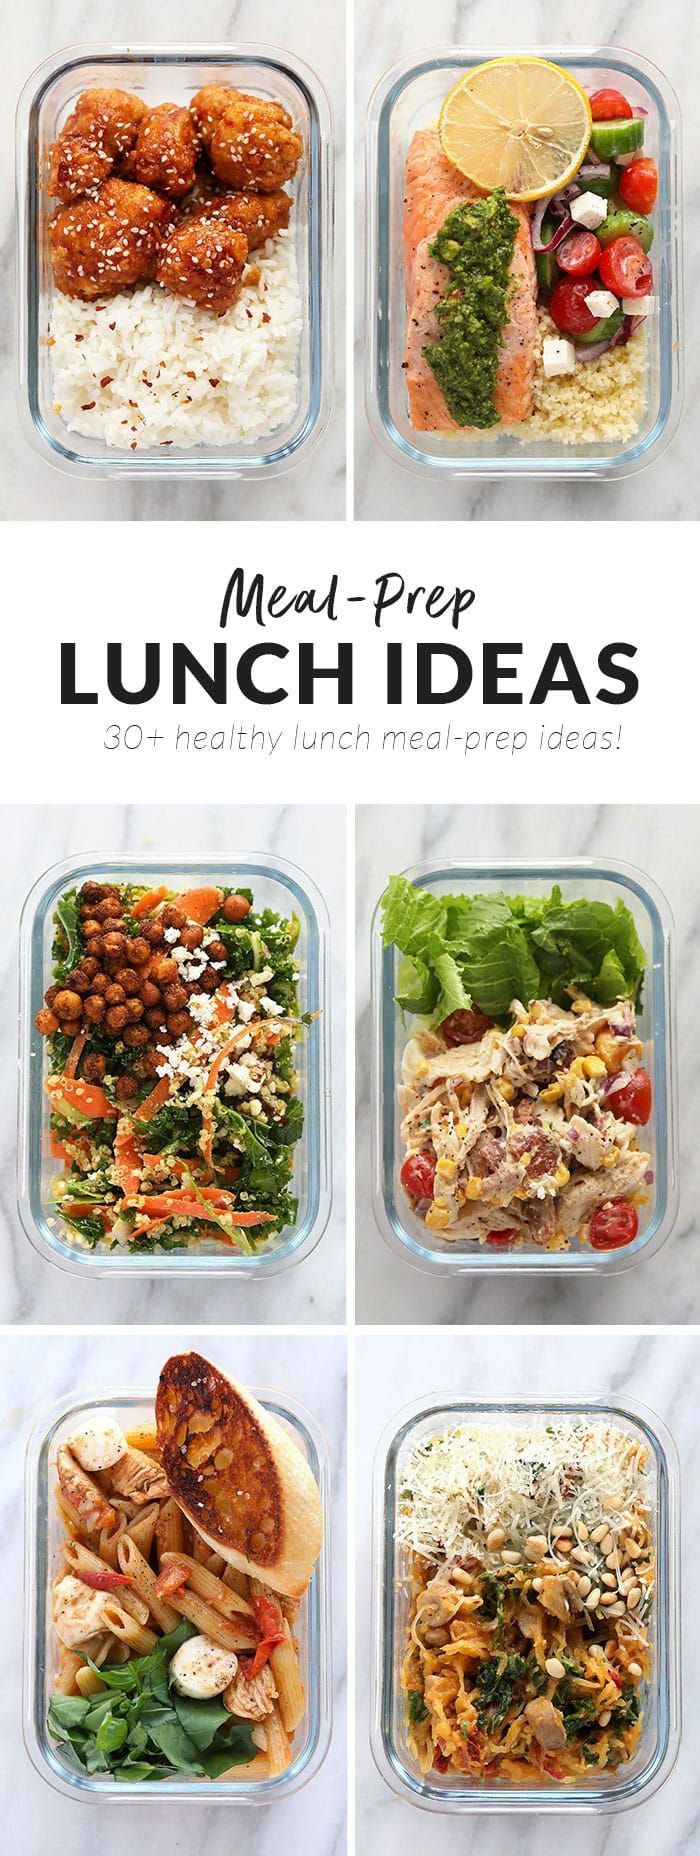 Delicious Healthy Lunch Ideas (30+ Meal Prep Ideas) - Fit Foodie Finds - Delicious Healthy Lunch Ideas (30+ Meal Prep Ideas) - Fit Foodie Finds -   18 meal prep recipes vegetarian fitness ideas